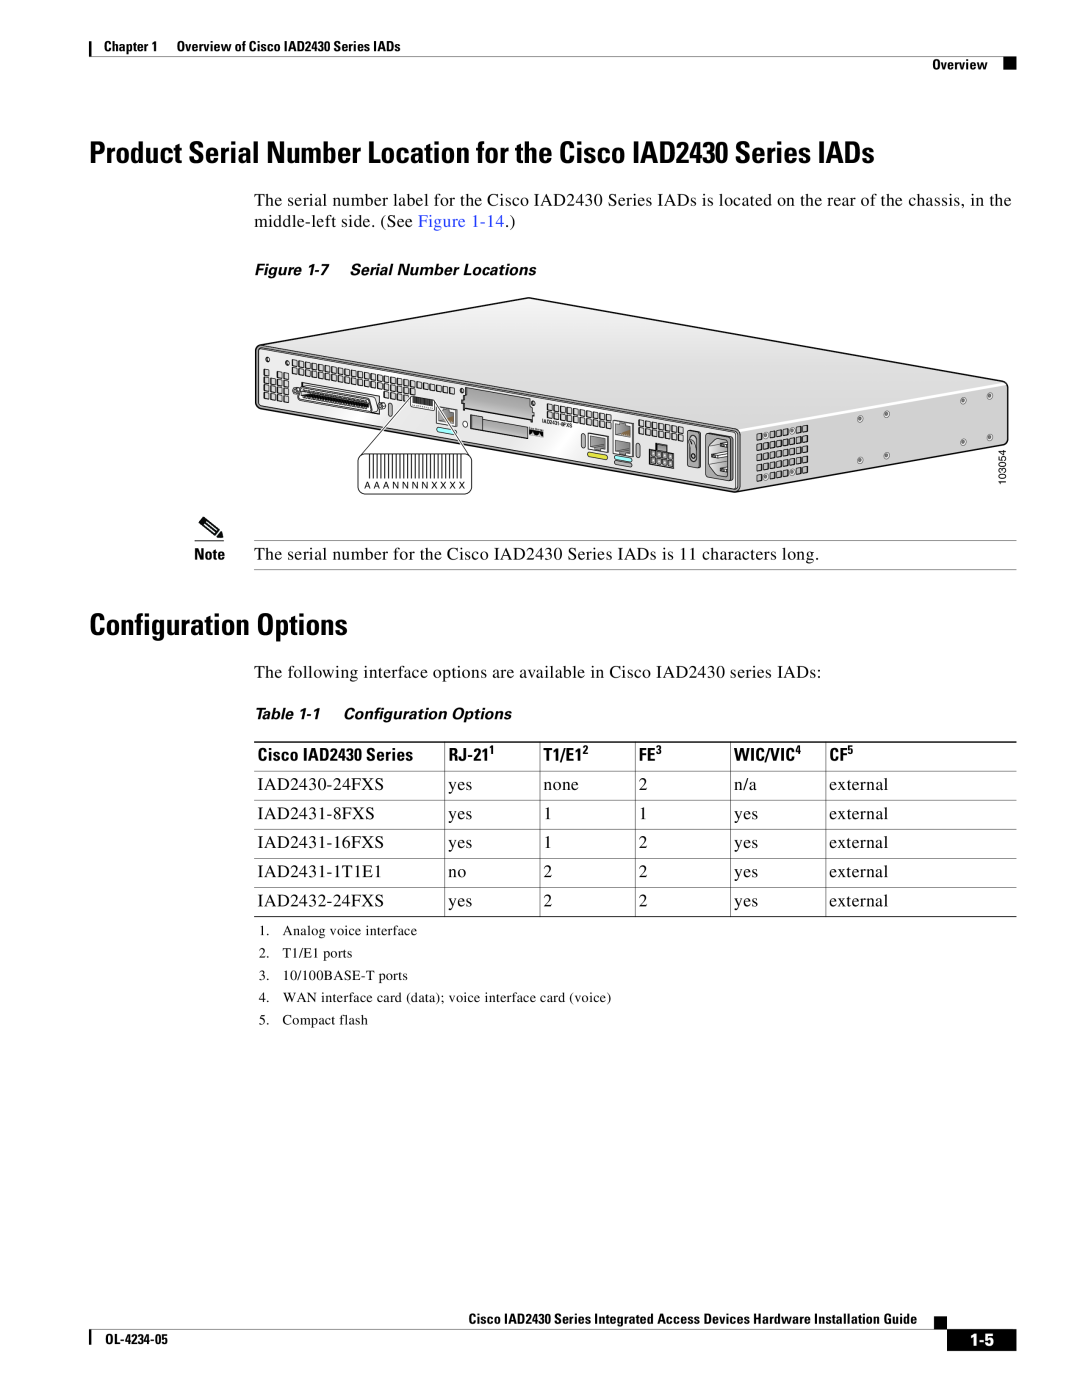 Cisco Systems Product Serial Number Location for the Cisco IAD2430 Series IADs, Configuration Options, RJ-21, T1/E1 